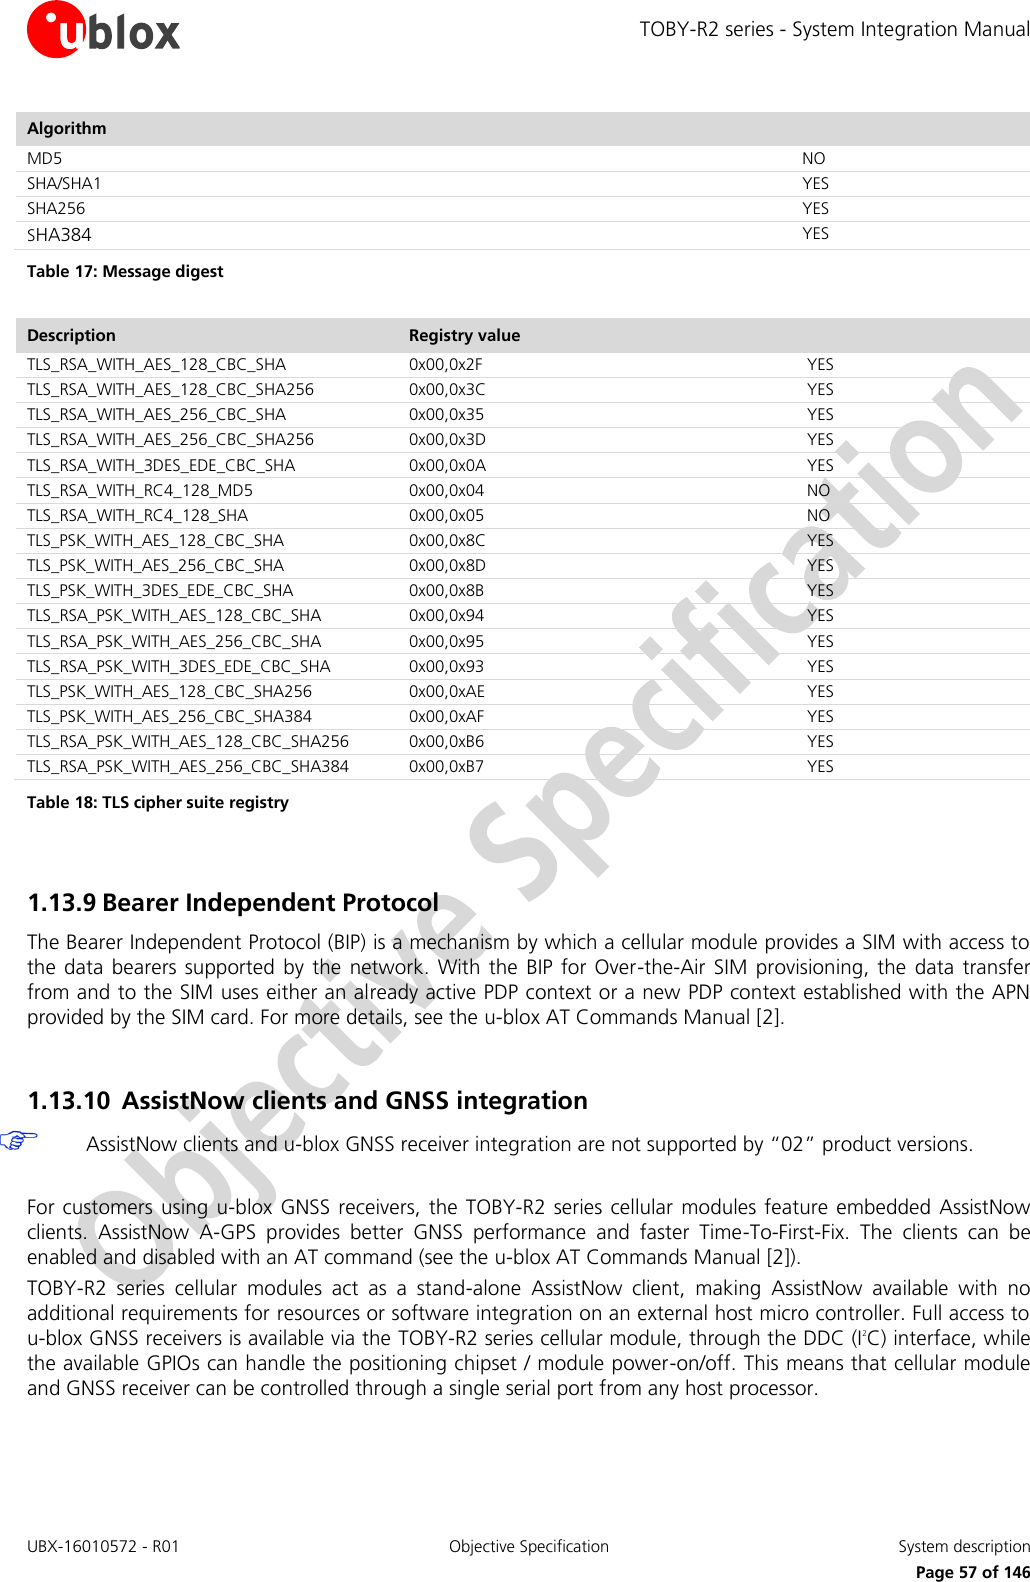 TOBY-R2 series - System Integration Manual UBX-16010572 - R01  Objective Specification  System description     Page 57 of 146 Algorithm   MD5  NO SHA/SHA1  YES SHA256  YES SHA384  YES Table 17: Message digest  Description Registry value   TLS_RSA_WITH_AES_128_CBC_SHA 0x00,0x2F  YES TLS_RSA_WITH_AES_128_CBC_SHA256 0x00,0x3C  YES TLS_RSA_WITH_AES_256_CBC_SHA 0x00,0x35  YES TLS_RSA_WITH_AES_256_CBC_SHA256 0x00,0x3D  YES TLS_RSA_WITH_3DES_EDE_CBC_SHA 0x00,0x0A  YES TLS_RSA_WITH_RC4_128_MD5 0x00,0x04  NO TLS_RSA_WITH_RC4_128_SHA 0x00,0x05  NO TLS_PSK_WITH_AES_128_CBC_SHA 0x00,0x8C  YES TLS_PSK_WITH_AES_256_CBC_SHA 0x00,0x8D  YES TLS_PSK_WITH_3DES_EDE_CBC_SHA 0x00,0x8B  YES TLS_RSA_PSK_WITH_AES_128_CBC_SHA 0x00,0x94  YES TLS_RSA_PSK_WITH_AES_256_CBC_SHA 0x00,0x95  YES TLS_RSA_PSK_WITH_3DES_EDE_CBC_SHA 0x00,0x93  YES TLS_PSK_WITH_AES_128_CBC_SHA256 0x00,0xAE  YES TLS_PSK_WITH_AES_256_CBC_SHA384 0x00,0xAF  YES TLS_RSA_PSK_WITH_AES_128_CBC_SHA256 0x00,0xB6  YES TLS_RSA_PSK_WITH_AES_256_CBC_SHA384 0x00,0xB7  YES Table 18: TLS cipher suite registry  1.13.9 Bearer Independent Protocol The Bearer Independent Protocol (BIP) is a mechanism by which a cellular module provides a SIM with access to the  data bearers supported  by the  network.  With  the  BIP  for Over-the-Air SIM  provisioning,  the data  transfer from and to the SIM uses either an already active PDP context or a new PDP context established with the APN provided by the SIM card. For more details, see the u-blox AT Commands Manual [2].  1.13.10 AssistNow clients and GNSS integration  AssistNow clients and u-blox GNSS receiver integration are not supported by “02” product versions.  For customers  using u-blox  GNSS receivers,  the TOBY-R2 series  cellular modules  feature  embedded AssistNow clients.  AssistNow  A-GPS  provides  better  GNSS  performance  and  faster  Time-To-First-Fix.  The  clients  can  be enabled and disabled with an AT command (see the u-blox AT Commands Manual [2]). TOBY-R2  series  cellular  modules  act  as  a  stand-alone  AssistNow  client,  making  AssistNow  available  with  no additional requirements for resources or software integration on an external host micro controller. Full access to u-blox GNSS receivers is available via the TOBY-R2 series cellular module, through the DDC (I2C) interface, while the available GPIOs can handle the positioning chipset / module power-on/off. This means that cellular module and GNSS receiver can be controlled through a single serial port from any host processor.  